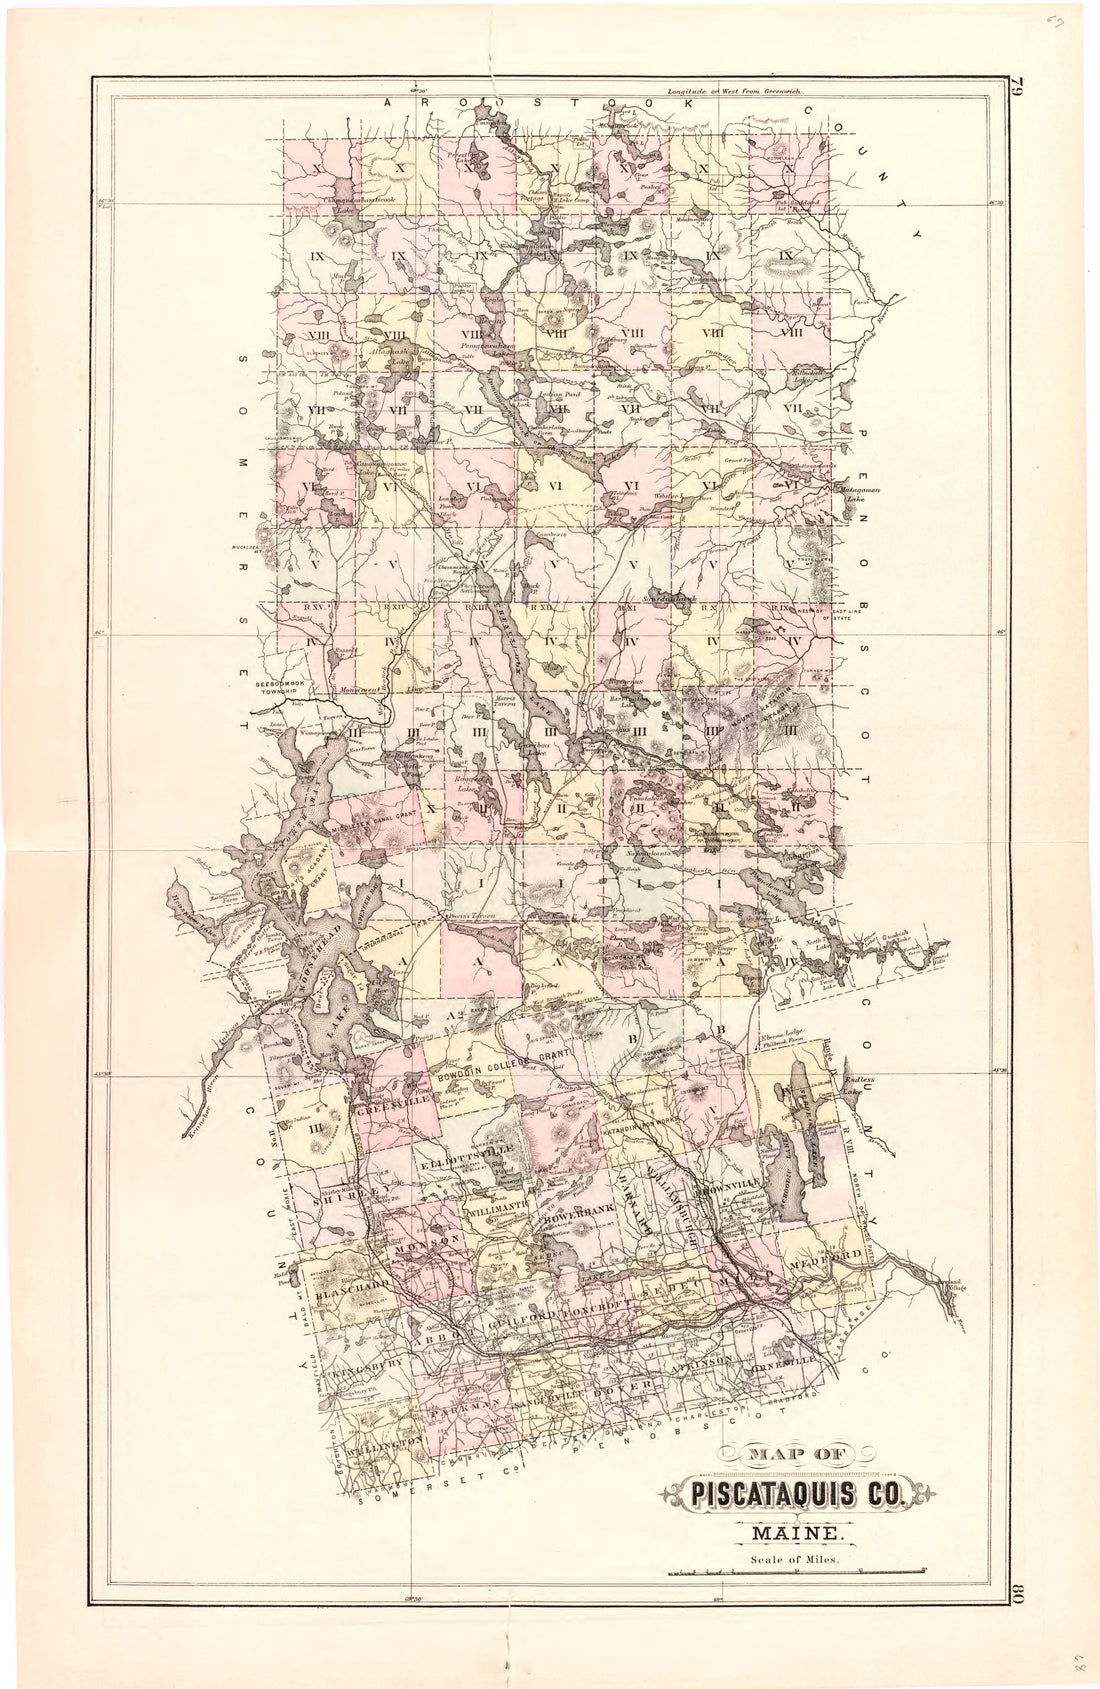 This hand drawn illustration (map) of Piscataquis Co. Maine from Colby&